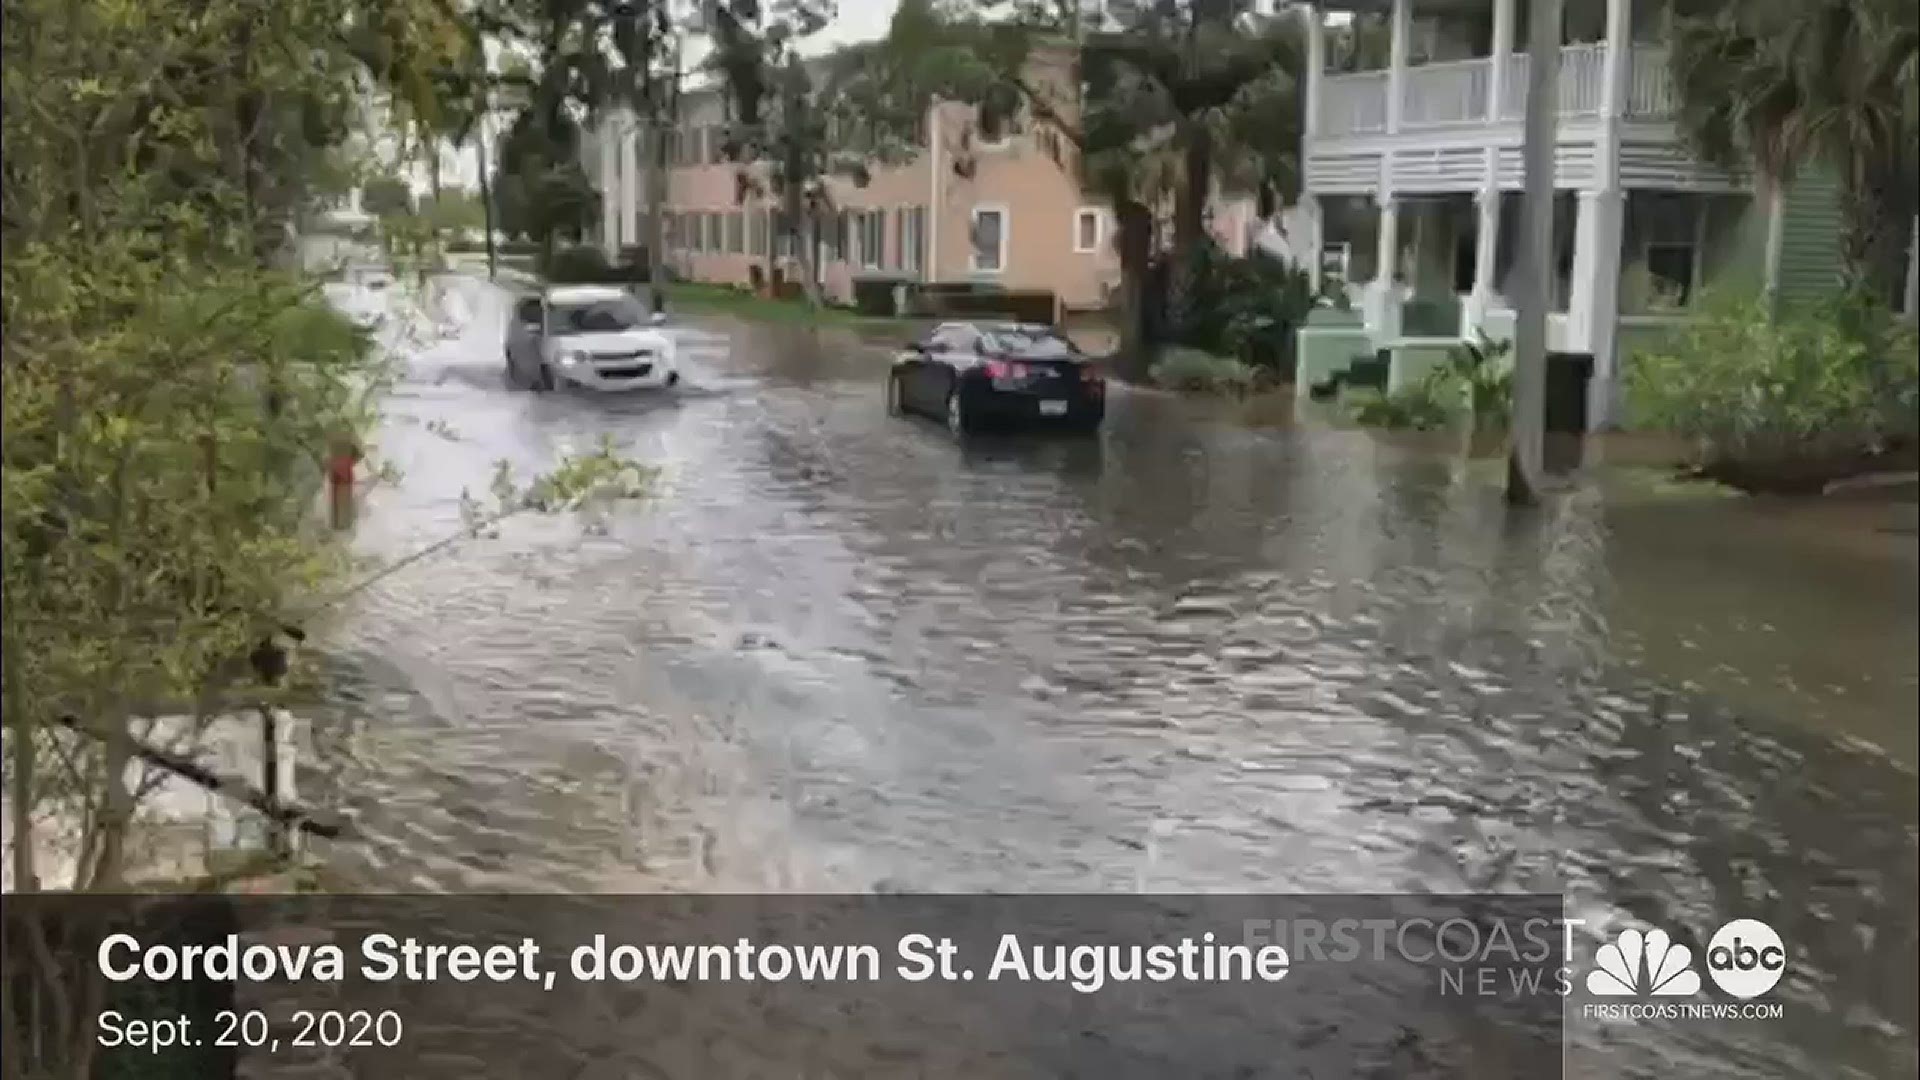 Ann McCullen shared this video with us of roadway flooding Saturday morning in downtown St. Augustine on Cordova Street.